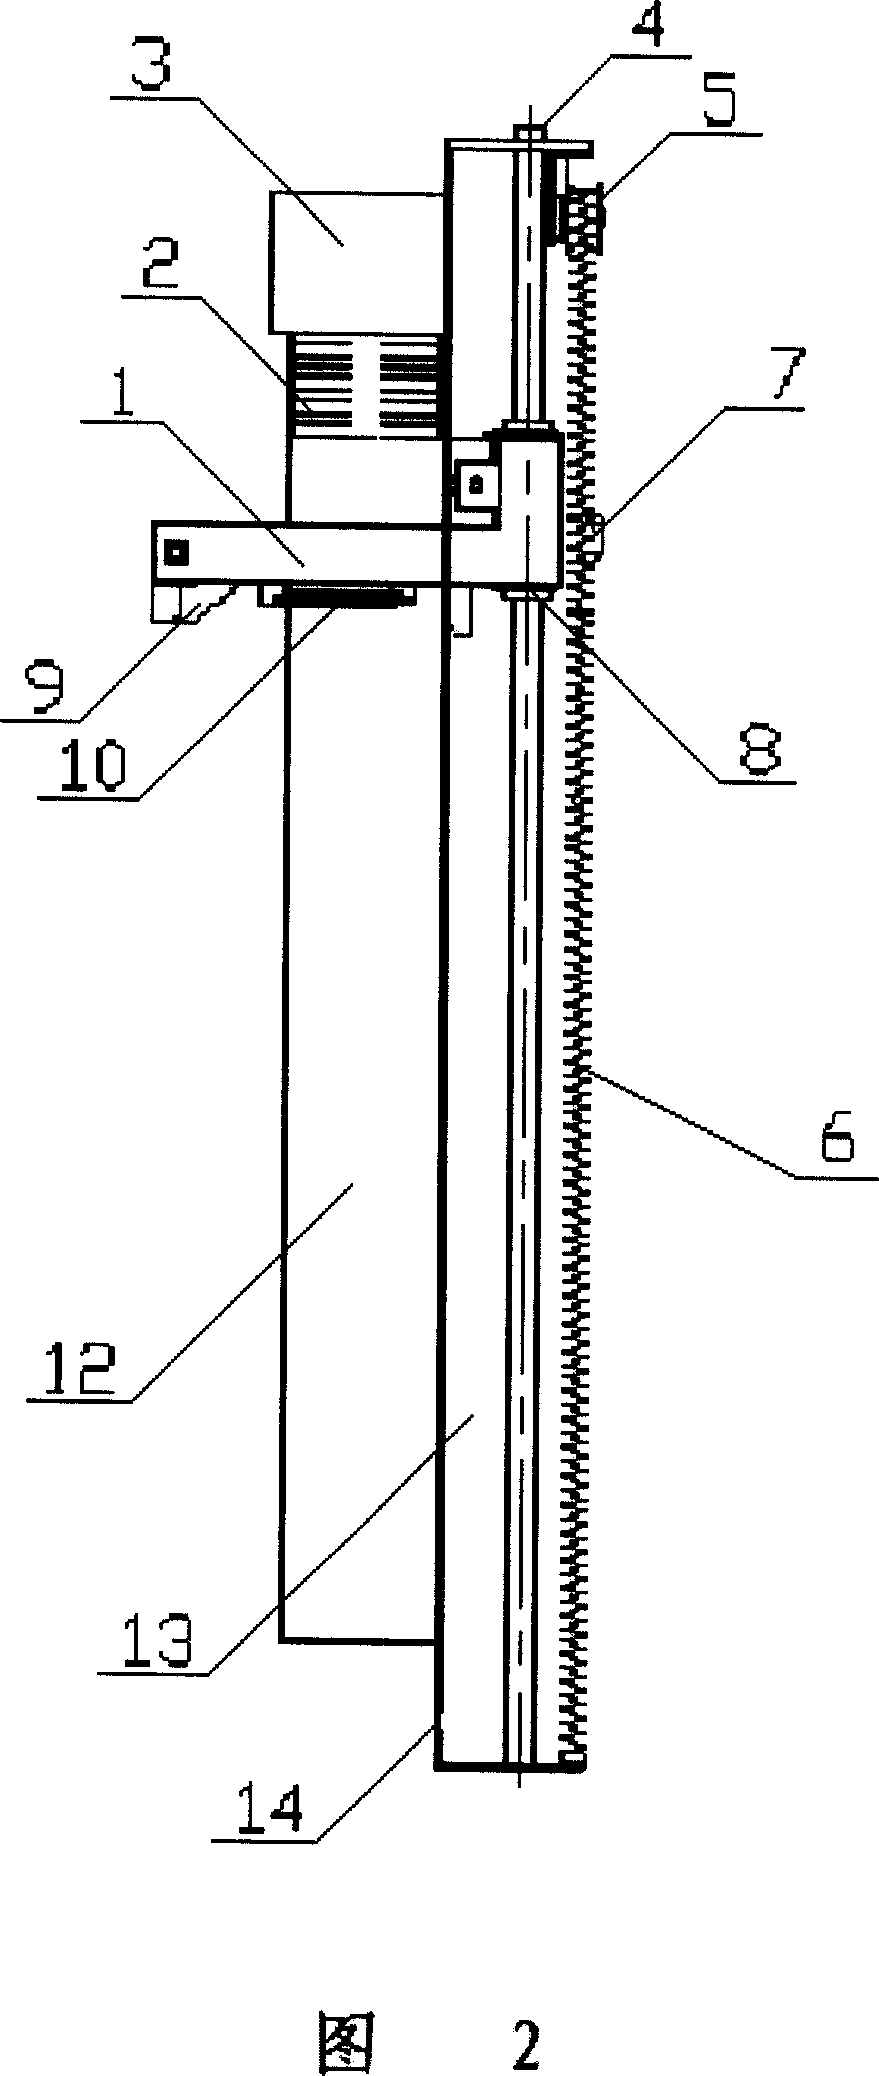 Card holding apparatus for automatic ticket sales